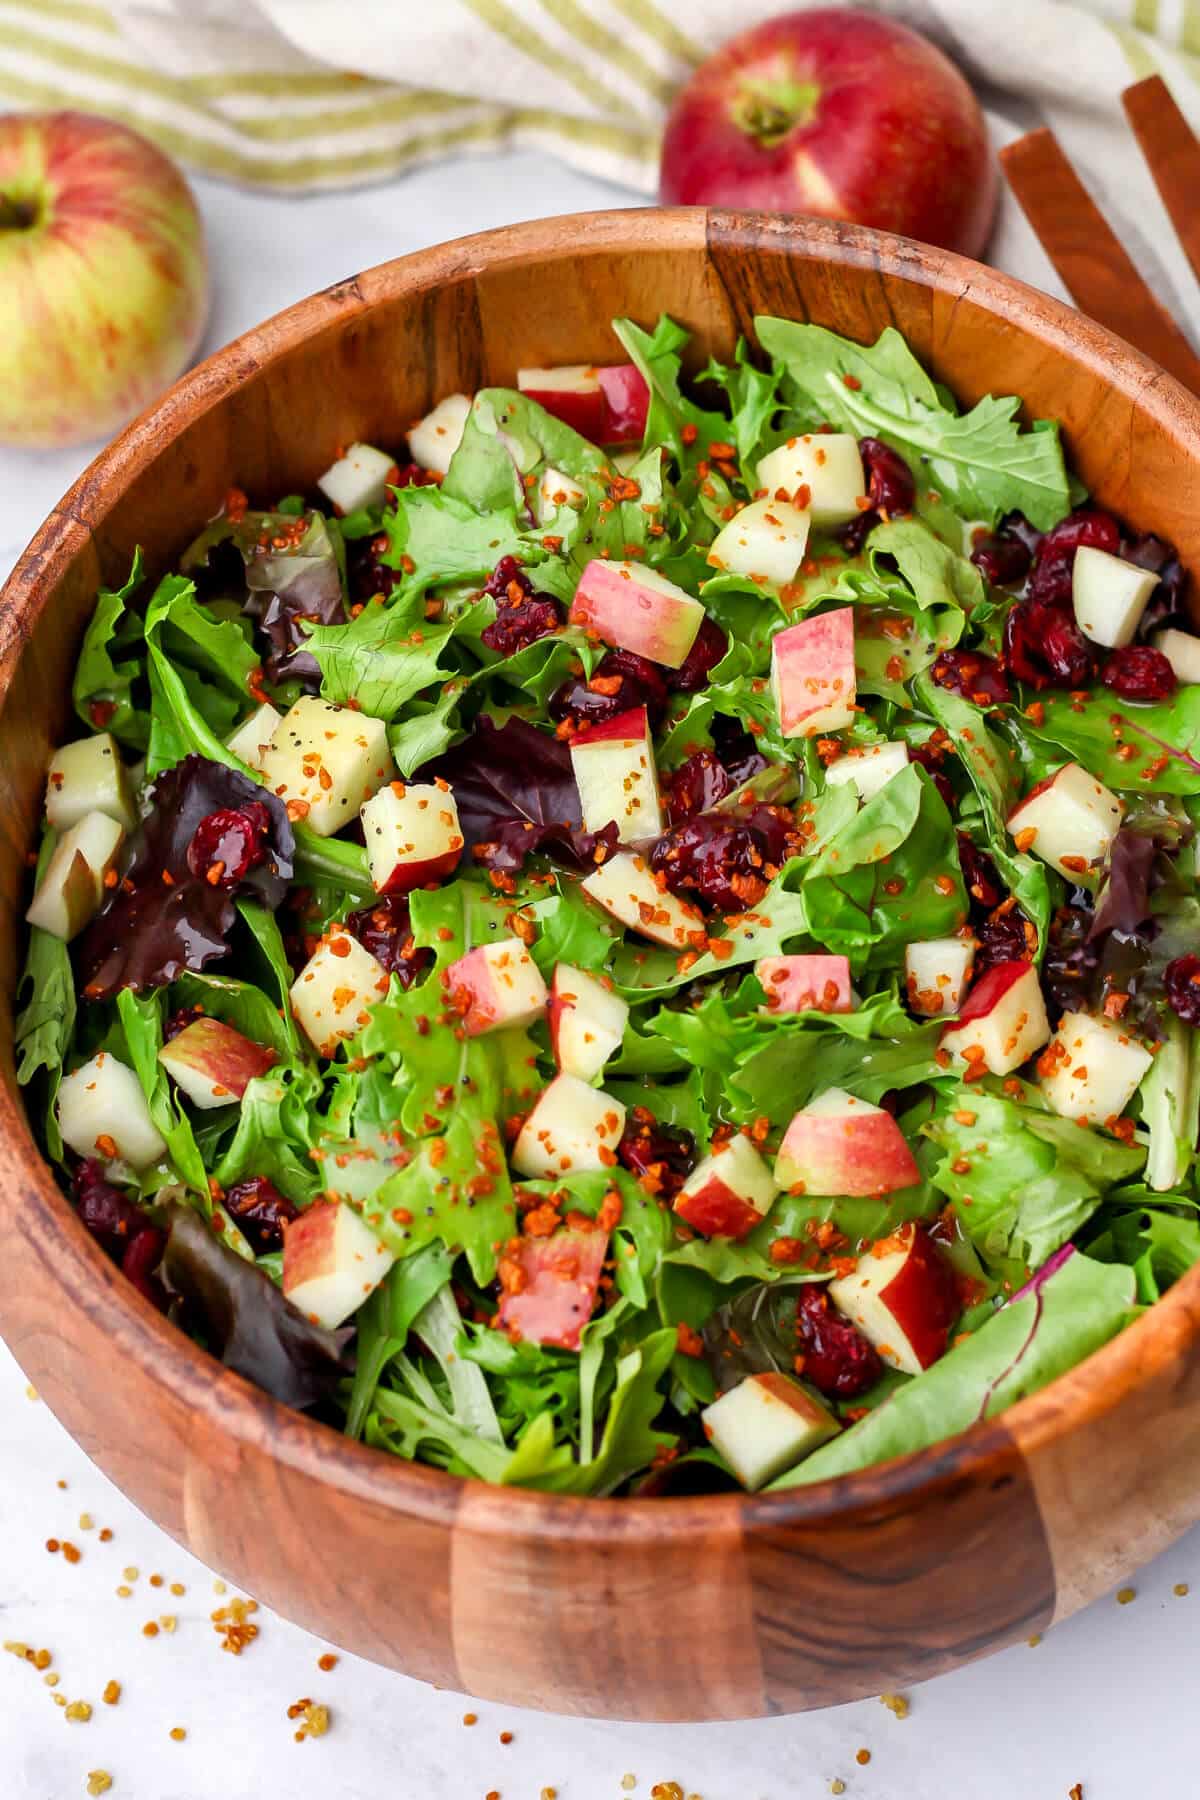 A top view of an apple salad made with mixed greens, diced apples and dried cranberries.